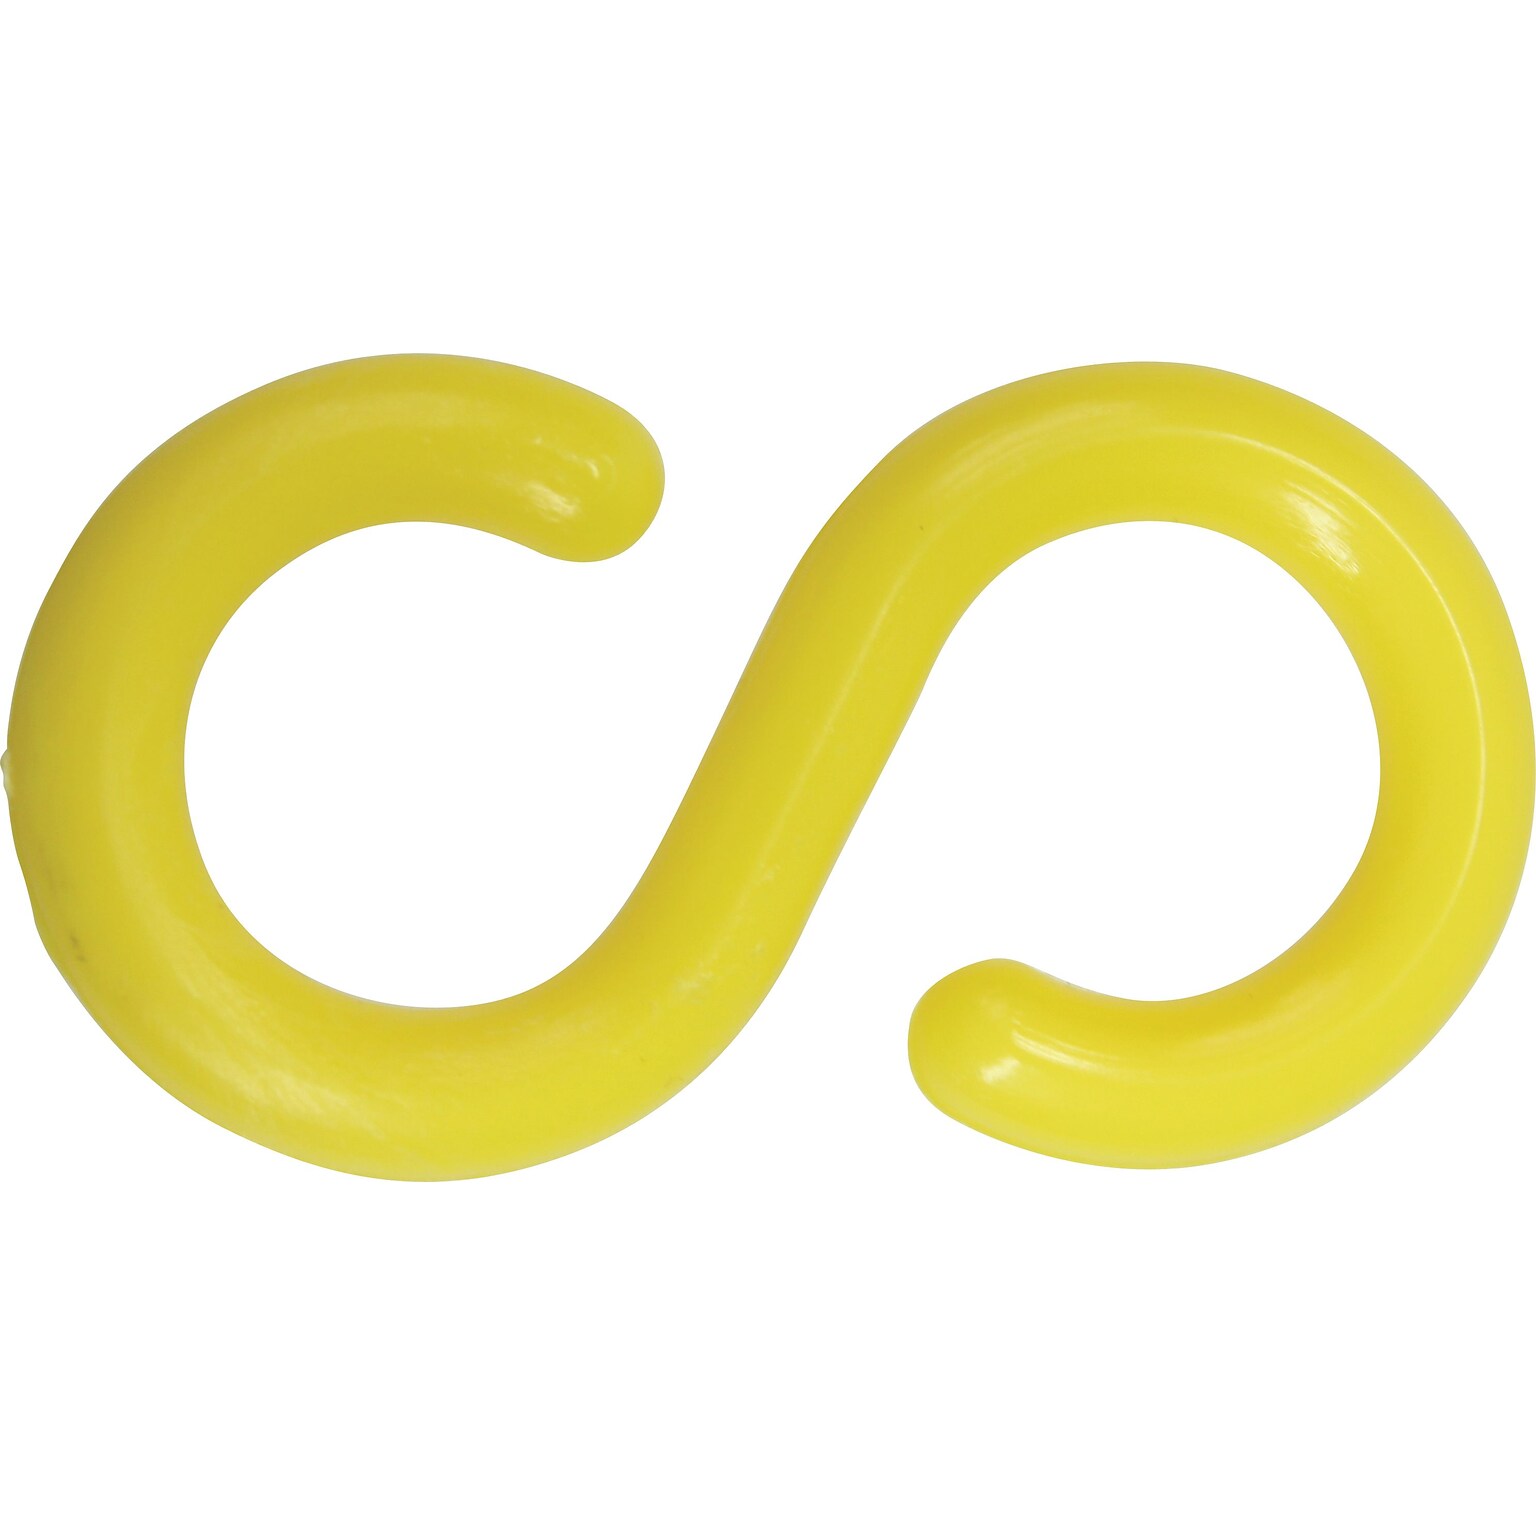 Accuform S-Hook, Accessory For Linking & Unlinking Separate Lengths of Plastic Chain, Yellow (PRC242YL)